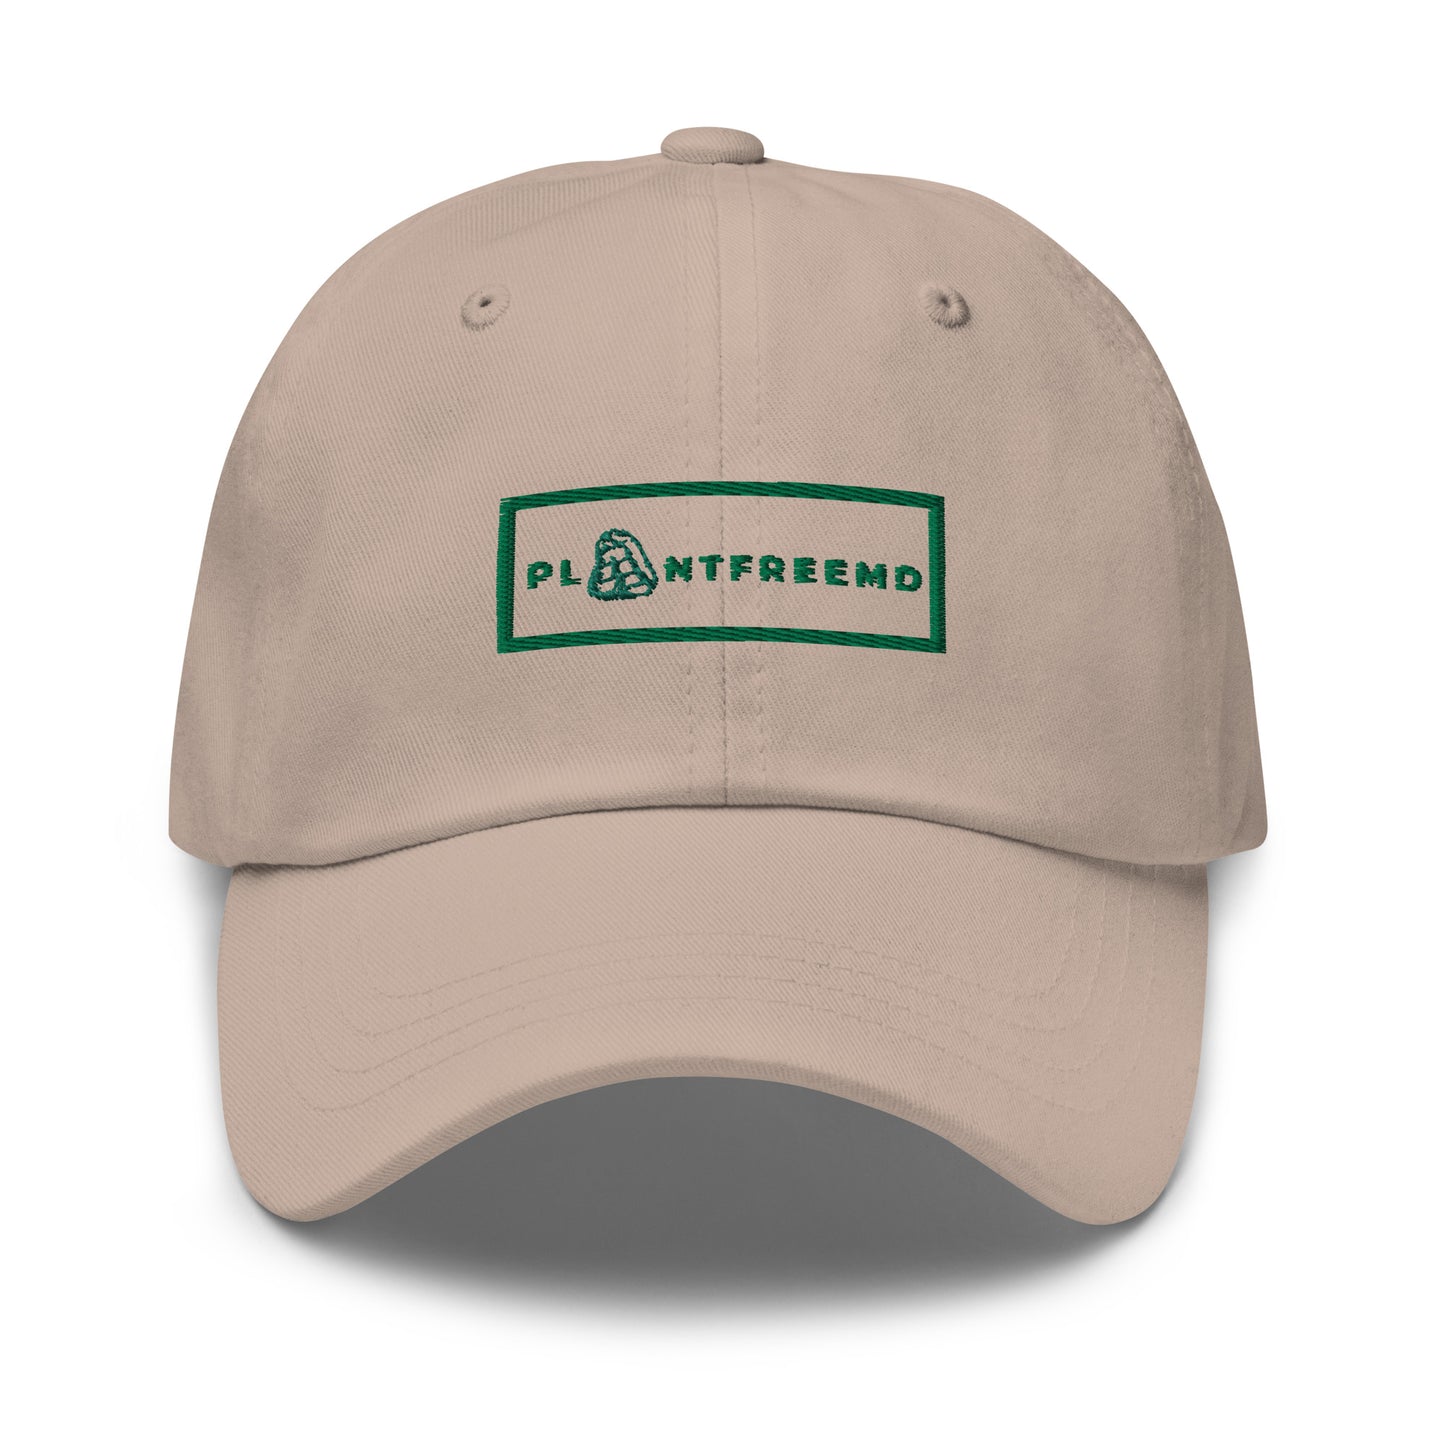 PlantFreeMD Hat Green Embroidery